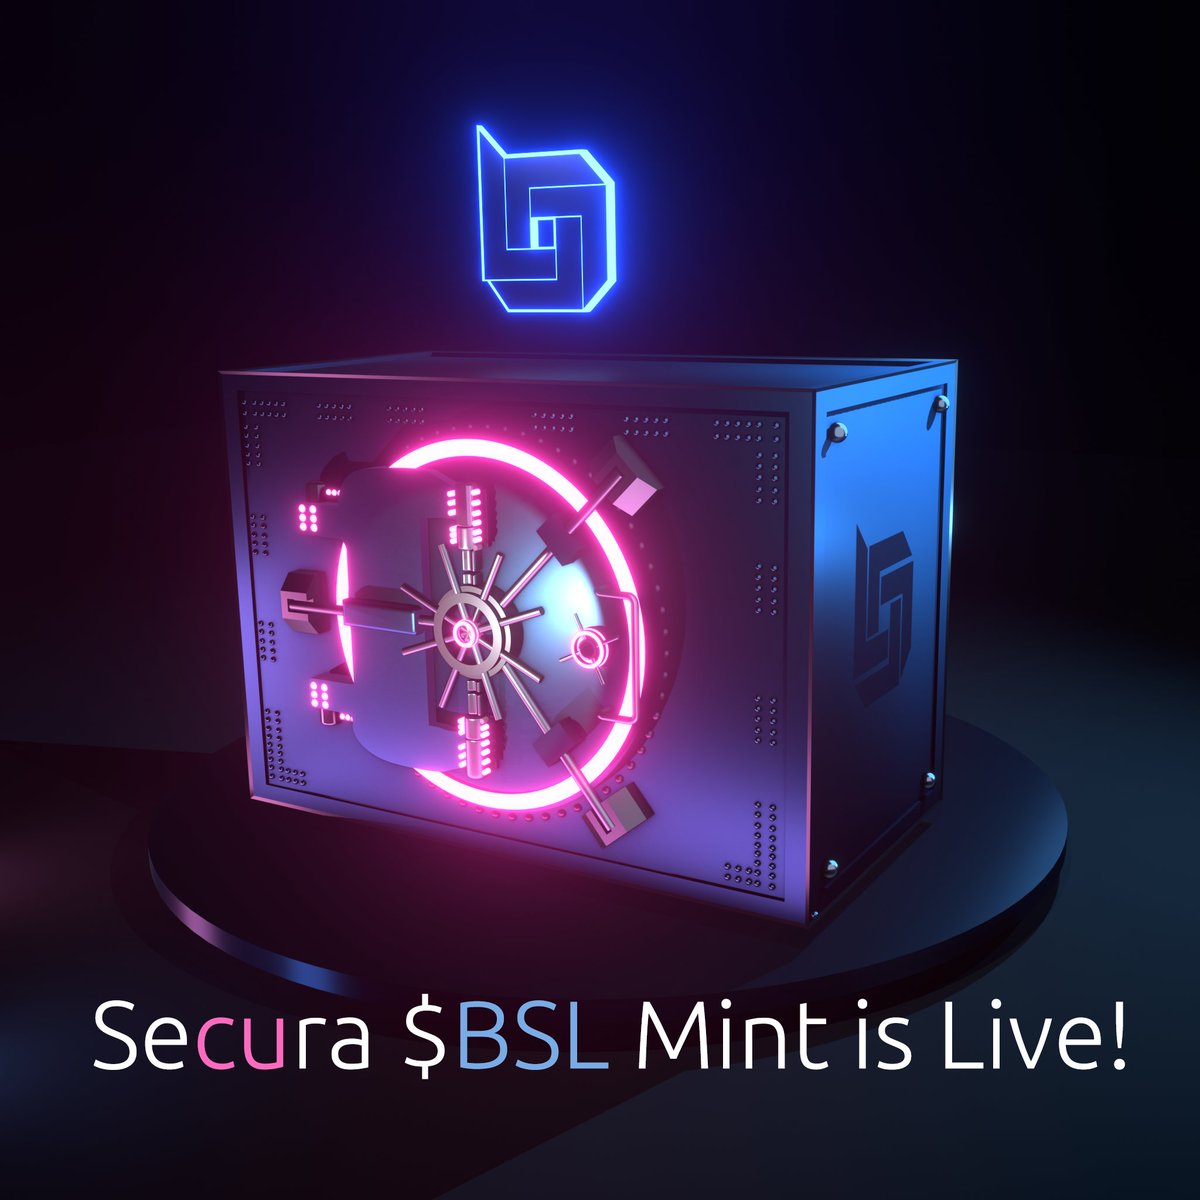 A limited supply of 50 of each #Secura NFT is now available for mint with $BSL on Sentx.io ✅ sentx.io/launchpad/mint… You can still purchase with Credit Card here: banksocial.io/secura or with #HBAR on Sentx.io, as well. Mint ends 5:00PM Central